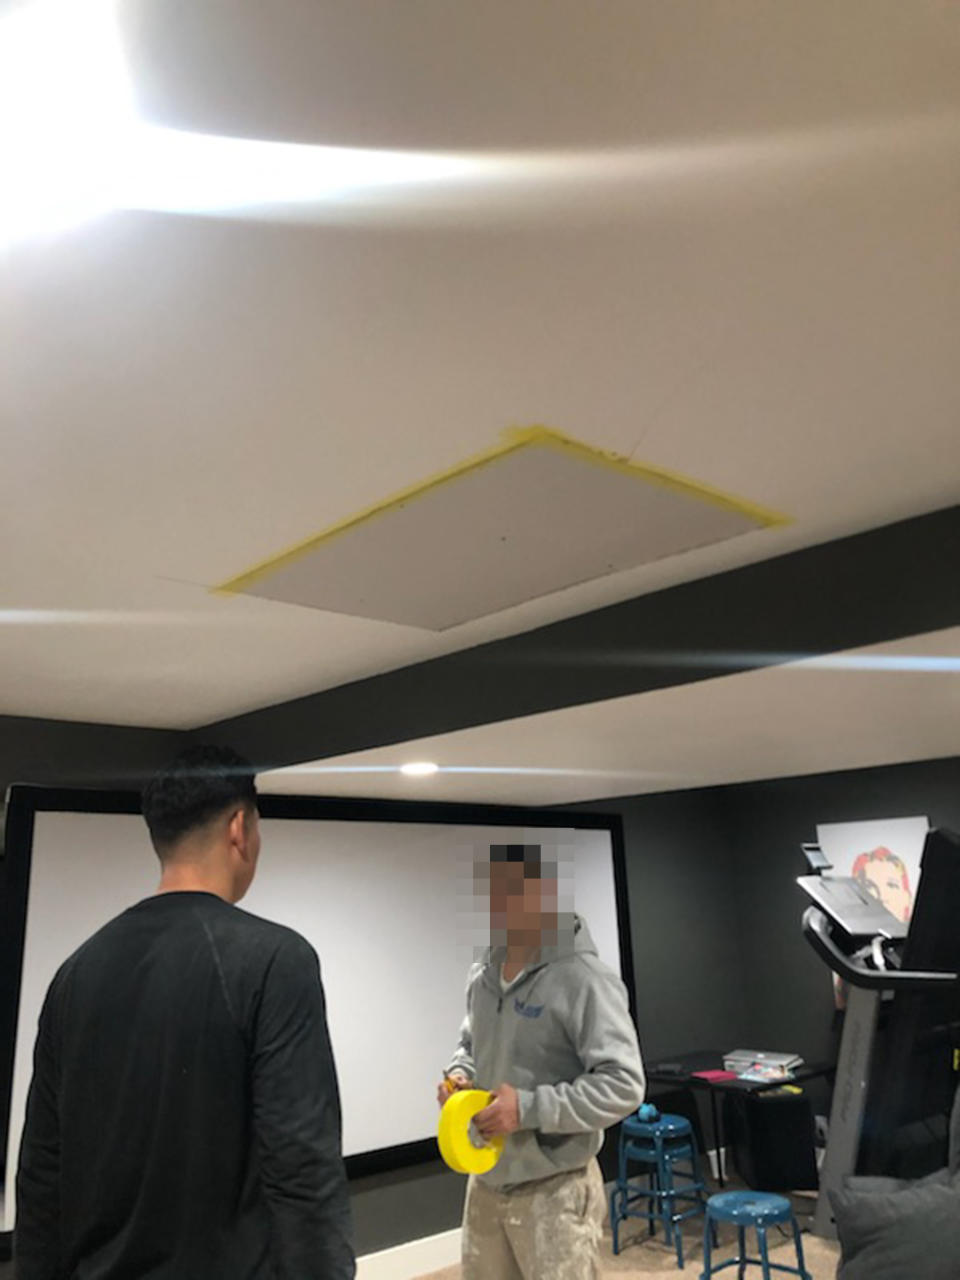 A photo provided by Jeff Hawley shows a hole in the ceiling being patched up after he said a construction worker fell through into the basement. (Teisha Hawley)